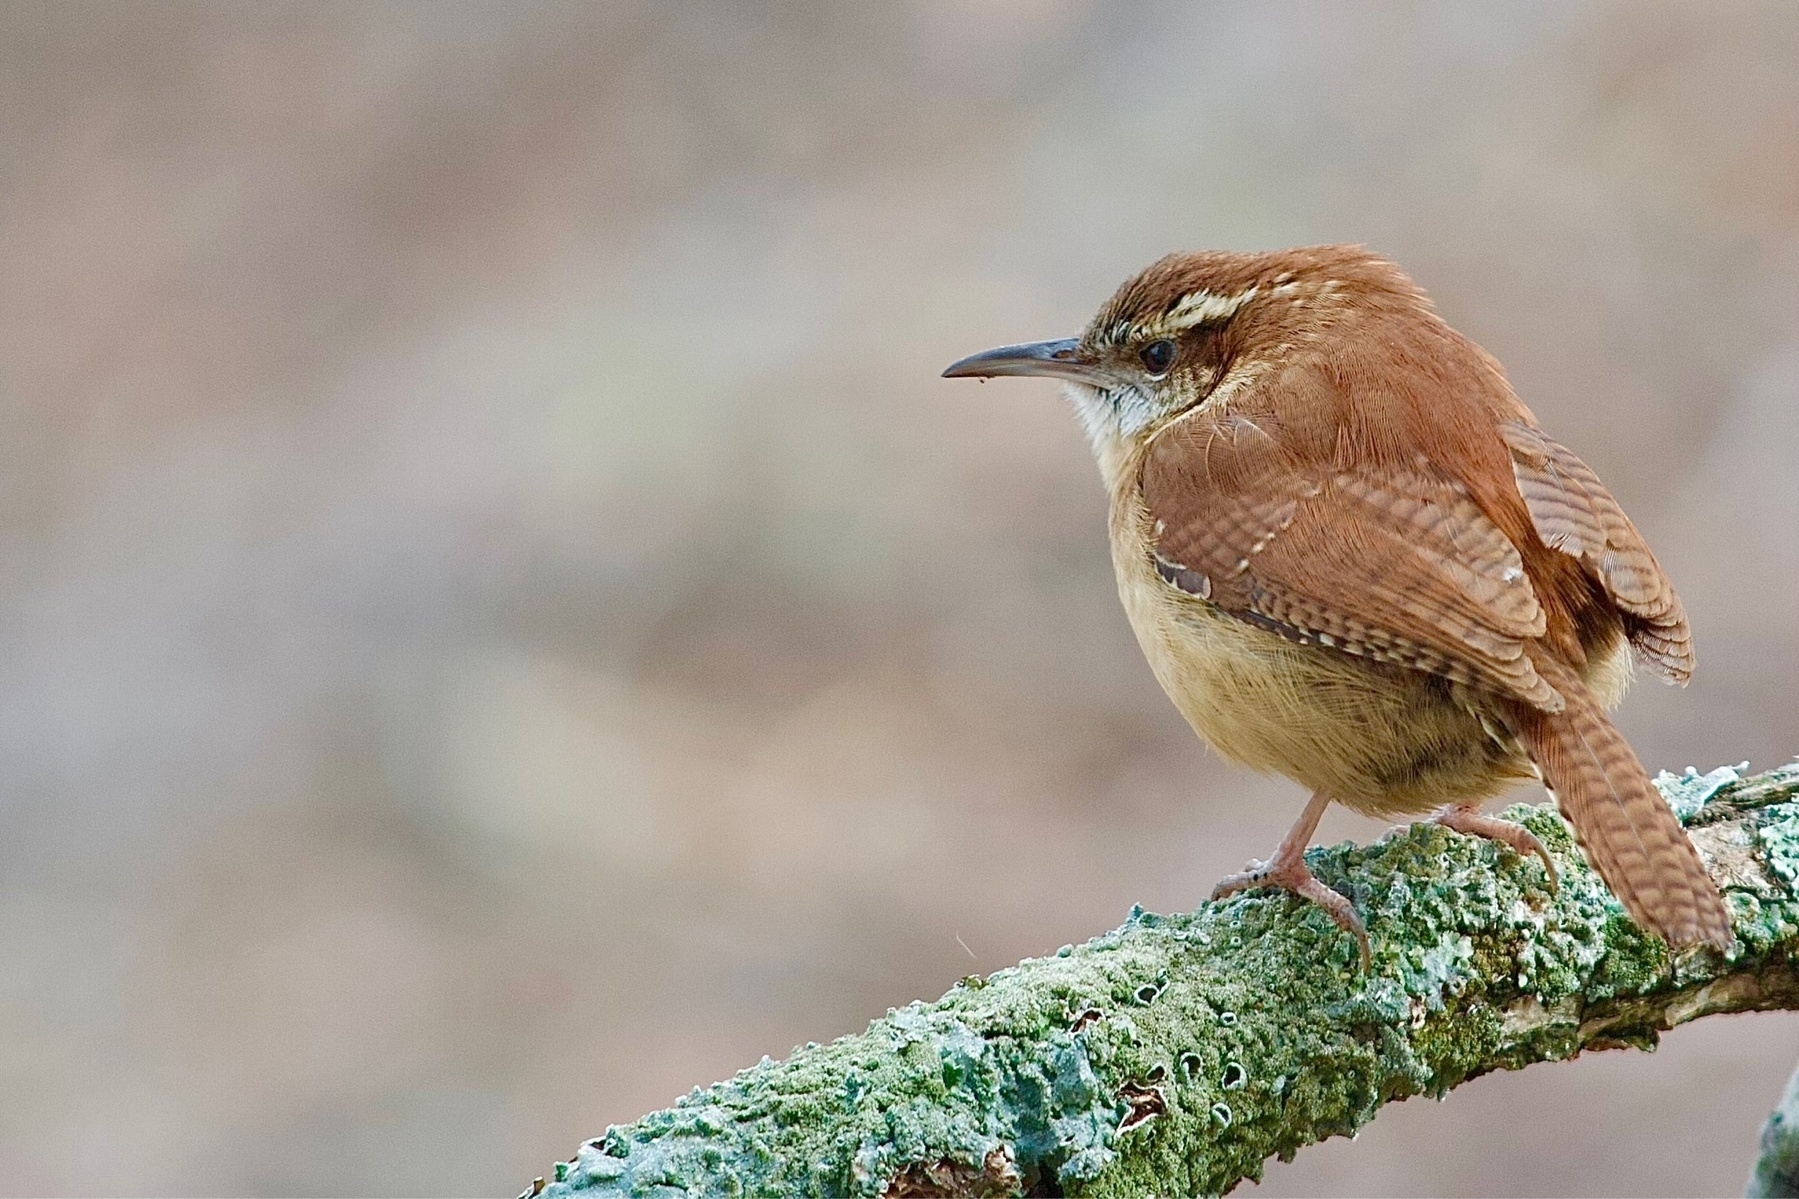 A small bird with a long white eyebrow, light brown underside and darker brown backside is perched on a lichen covered branch set against a blurred brown background.